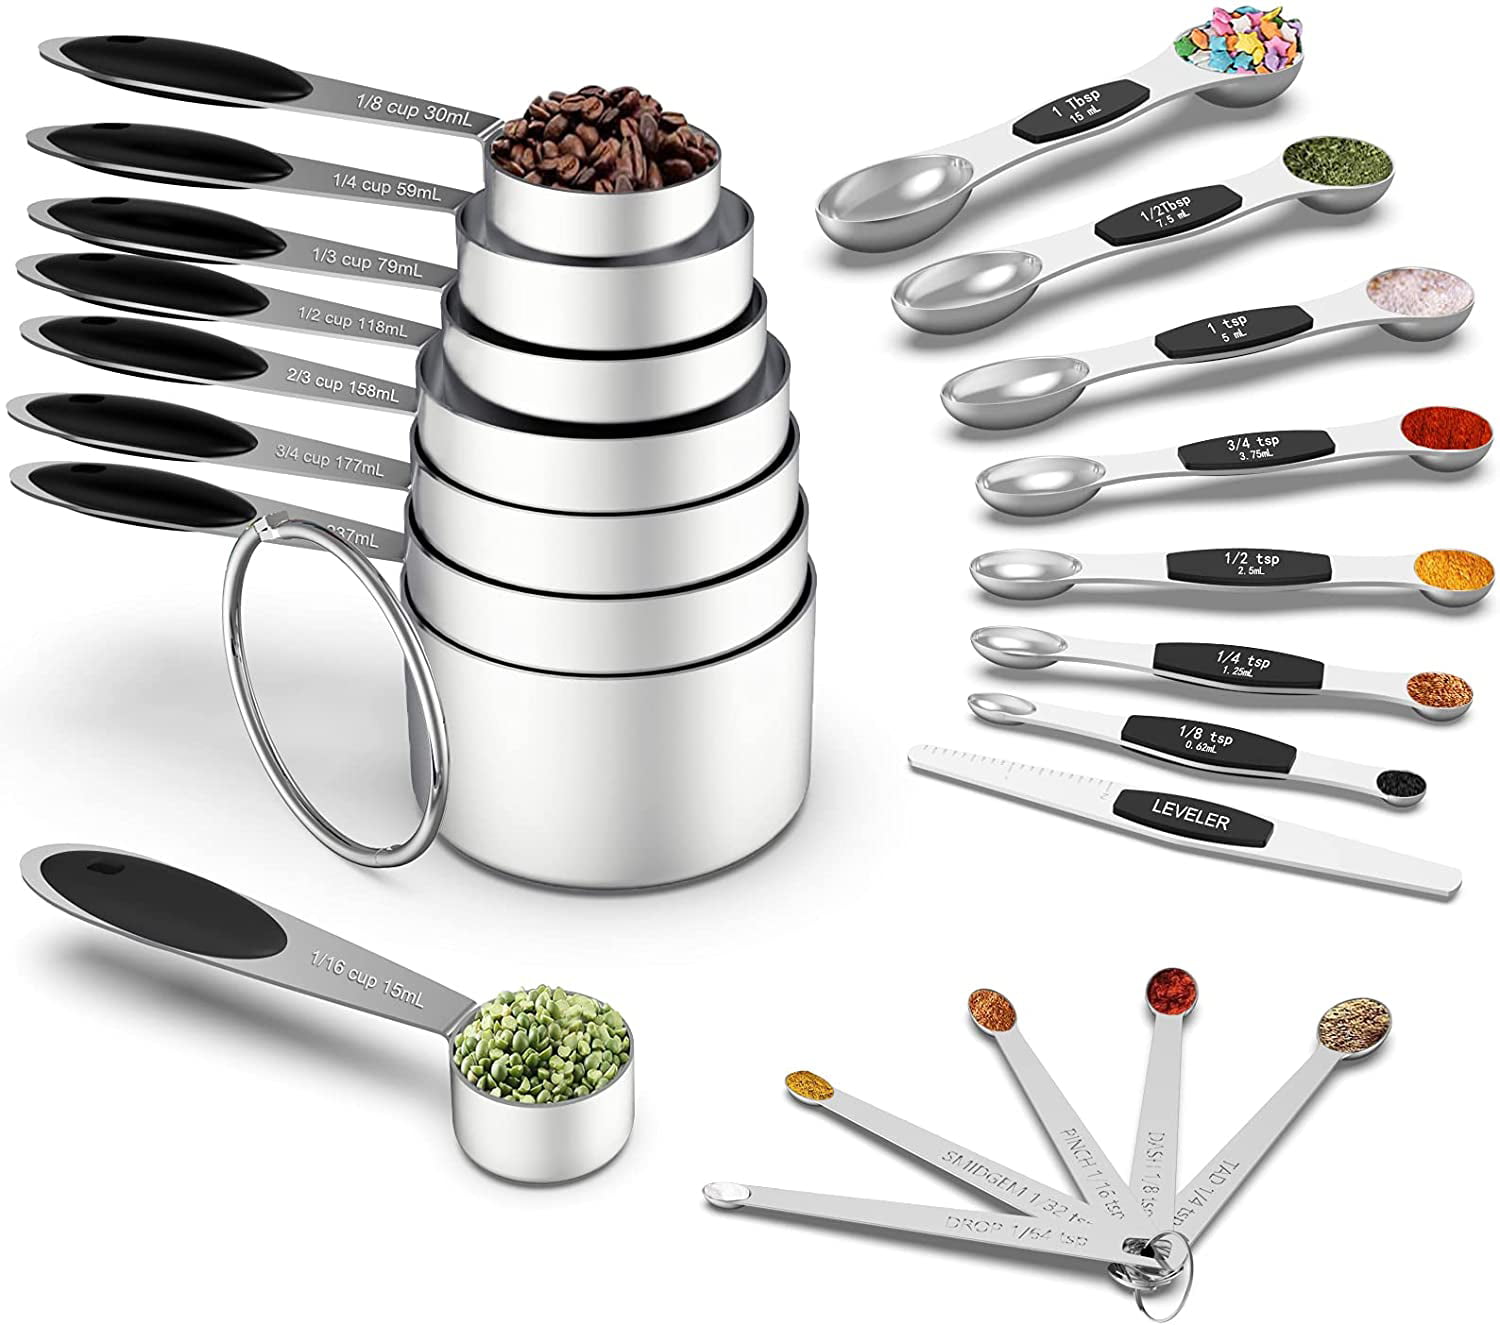 8 Pieces Measuring Cups Magnetic Spoons Set Stainless Steel Kitchen Utensils New